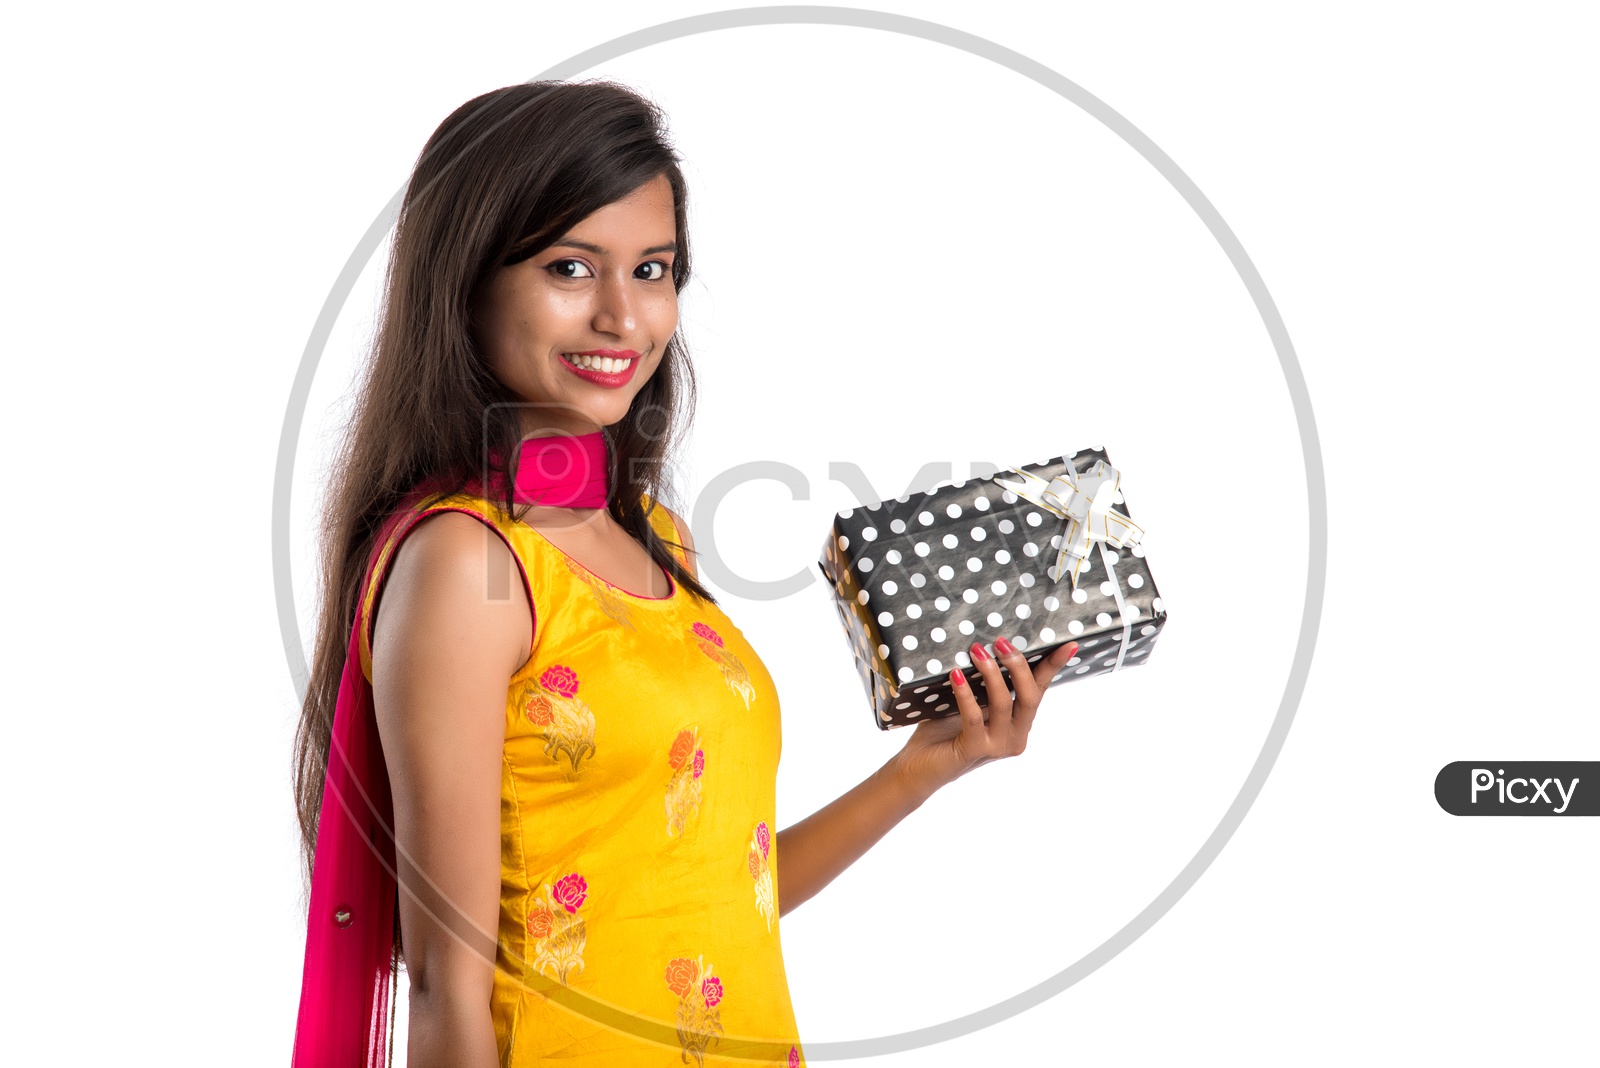 Beautiful Indian Girl Holding Gift Boxes In hand with a  Smile Face